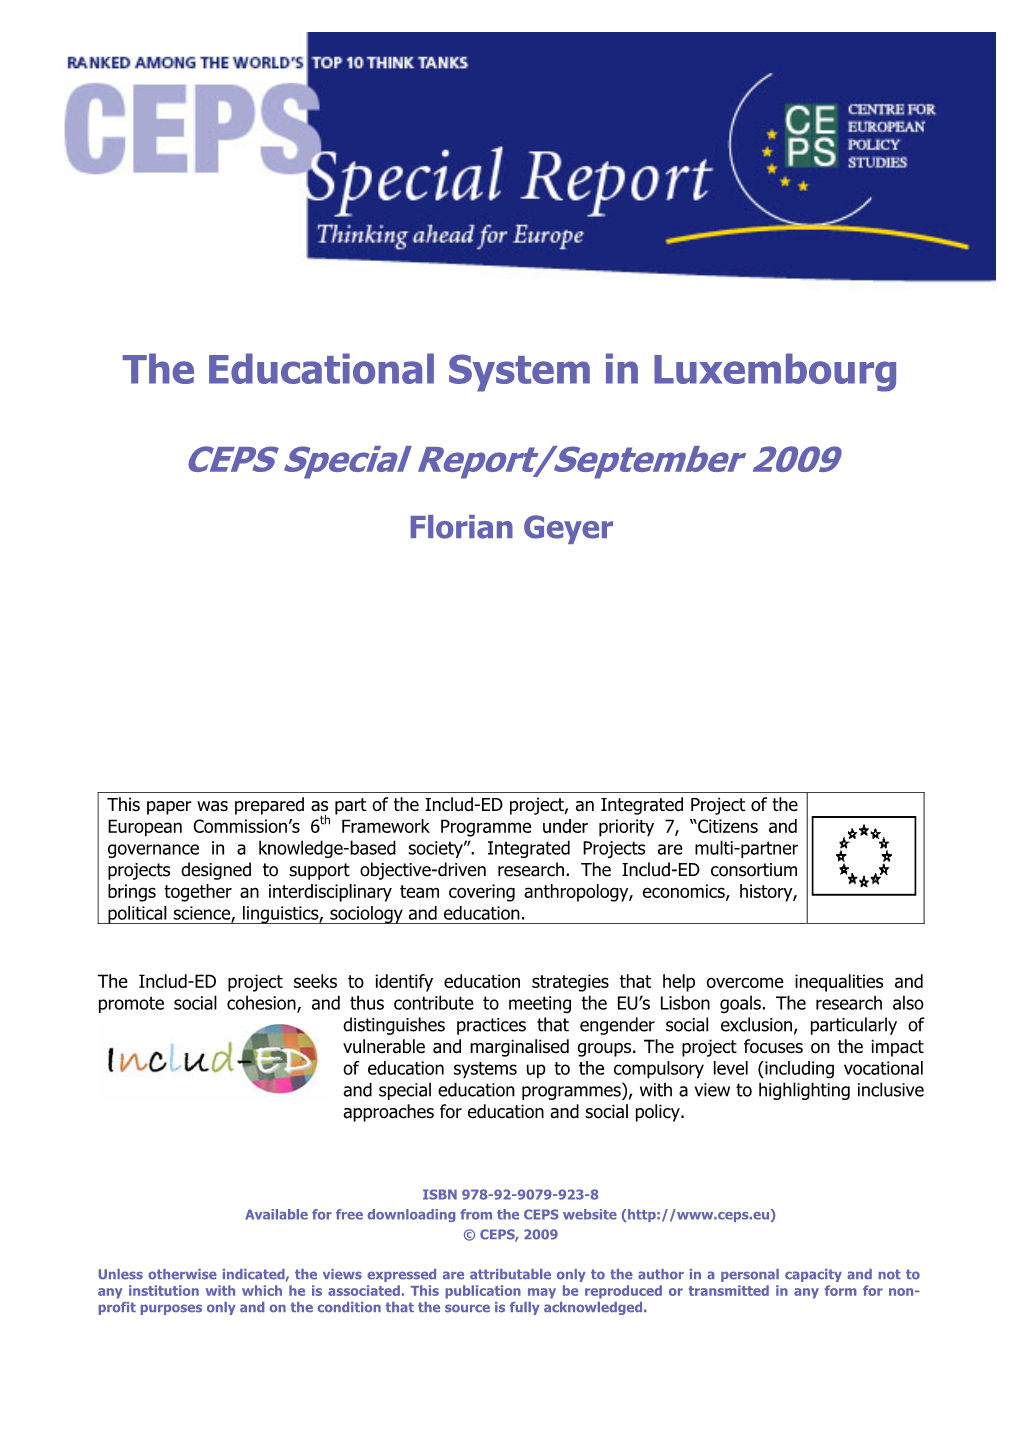 The Educational System in Luxembourg